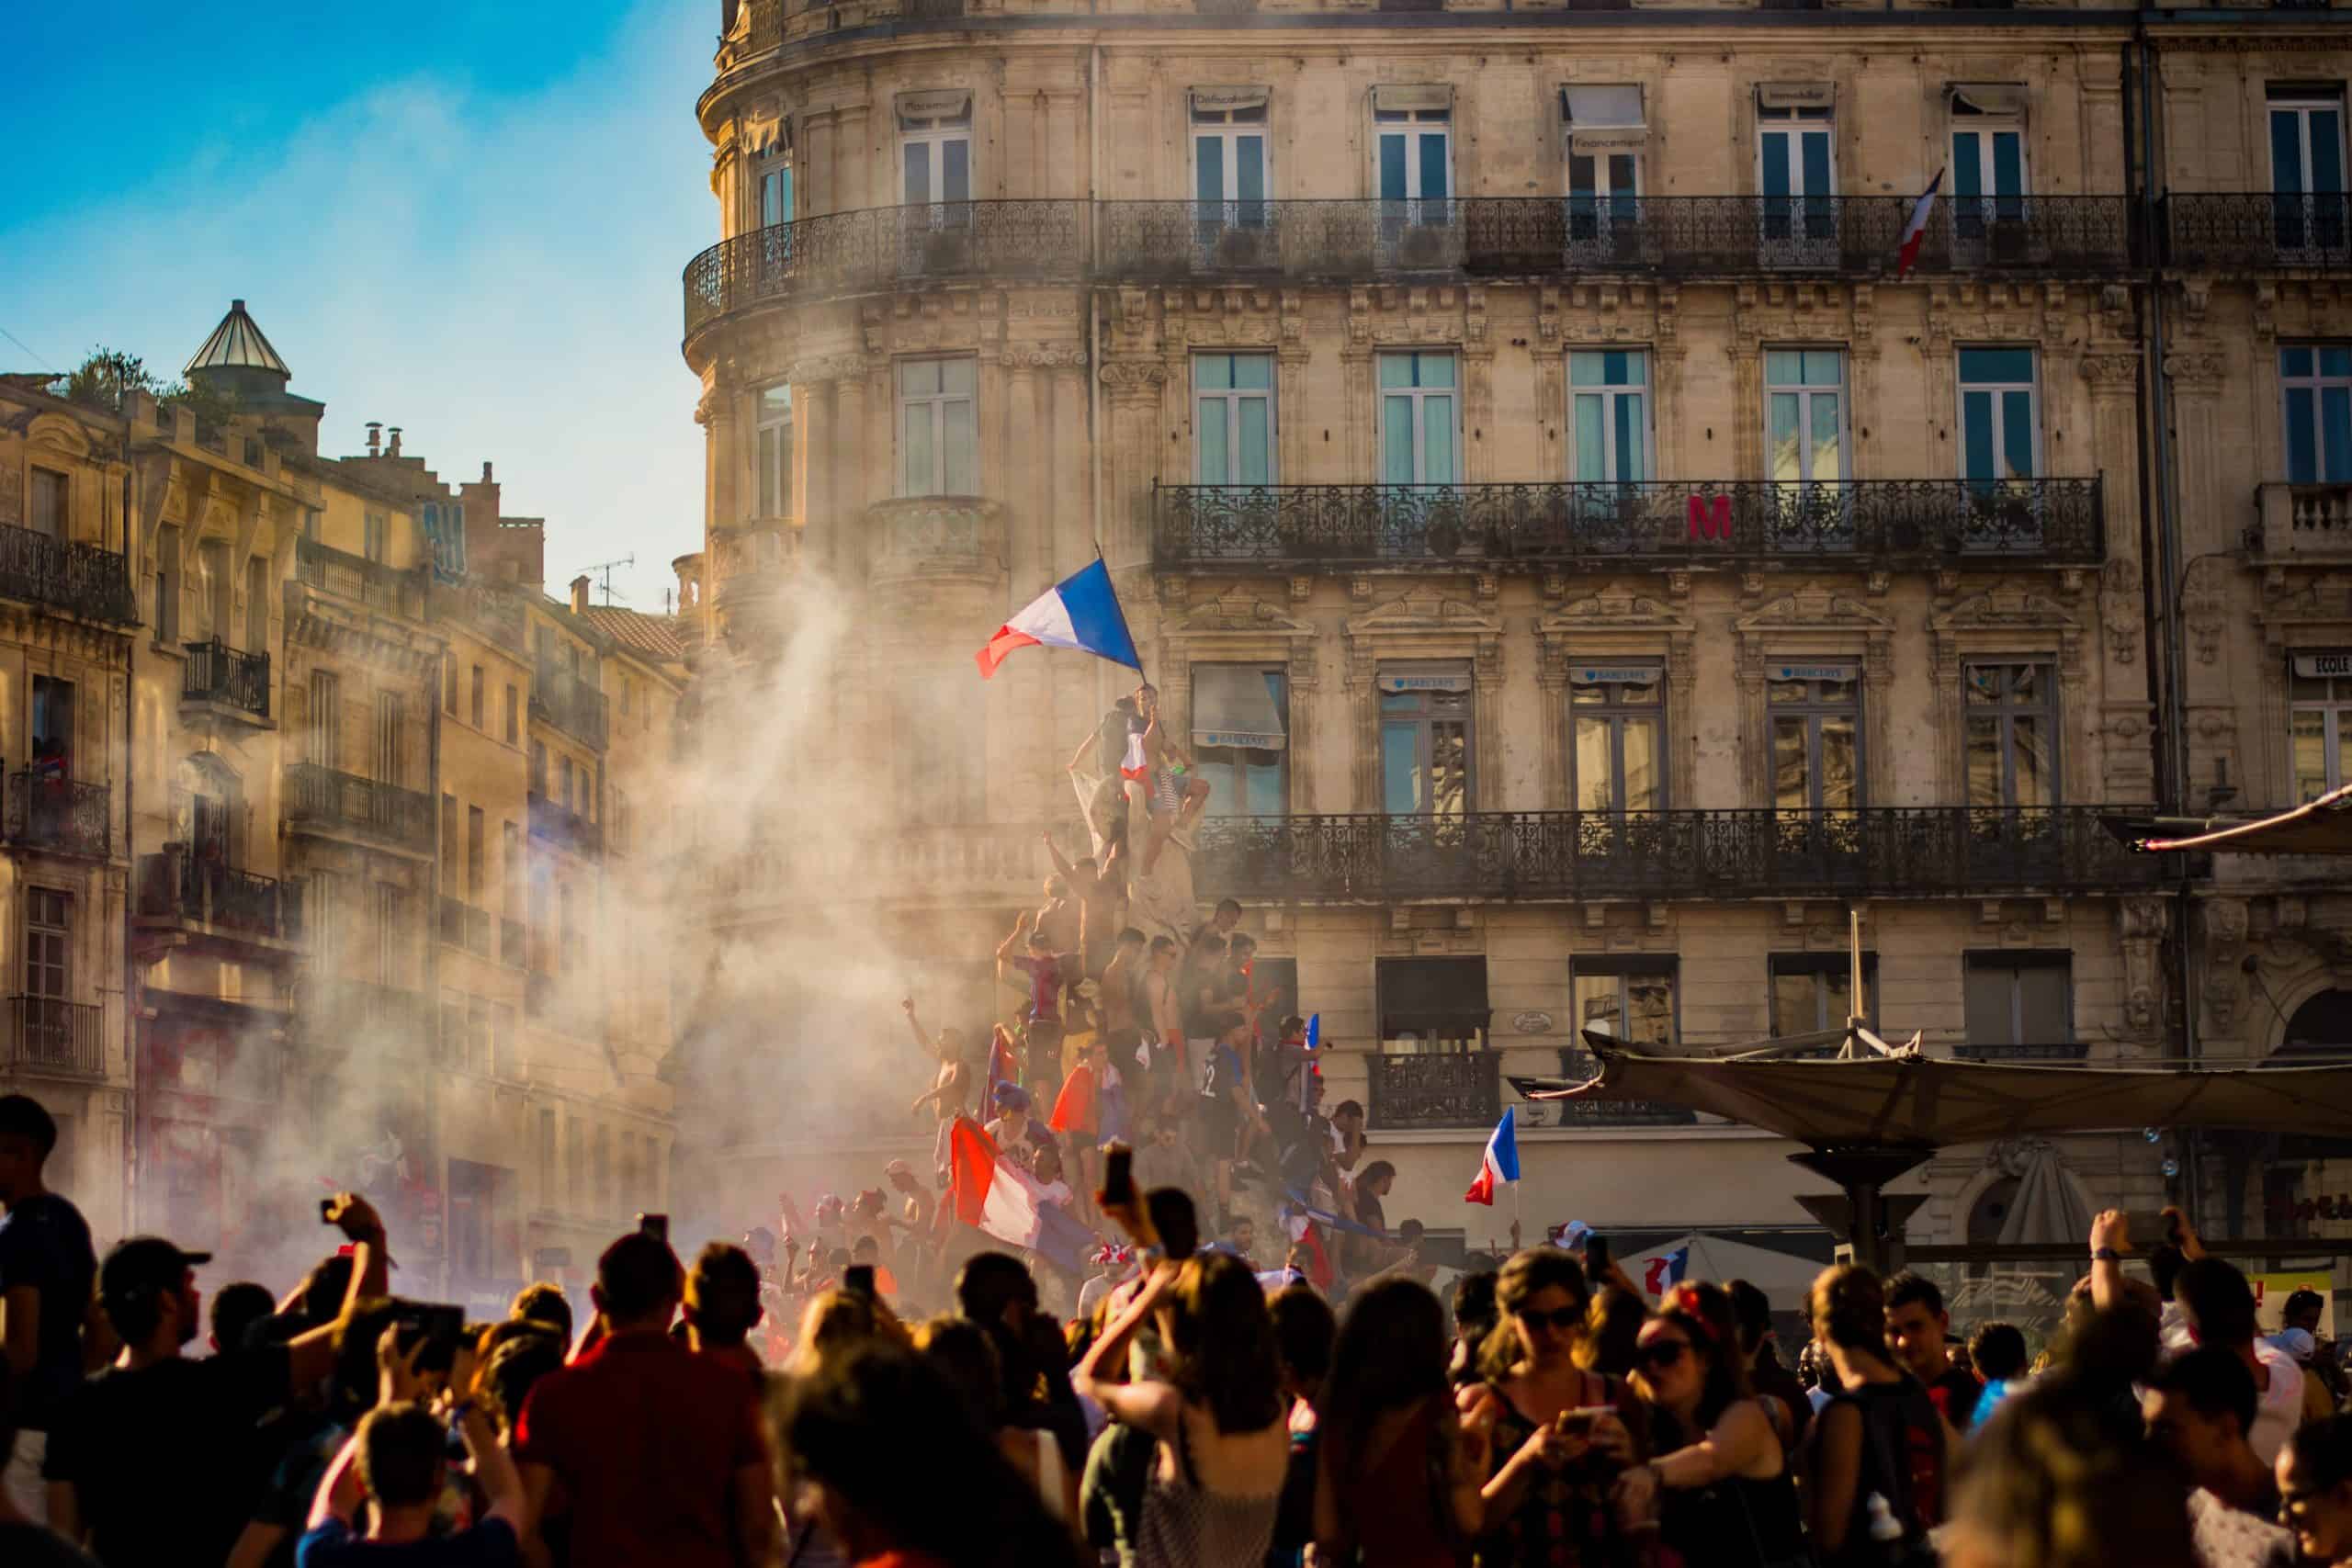 French revolution celebration with flags, smoke and in front of buildings